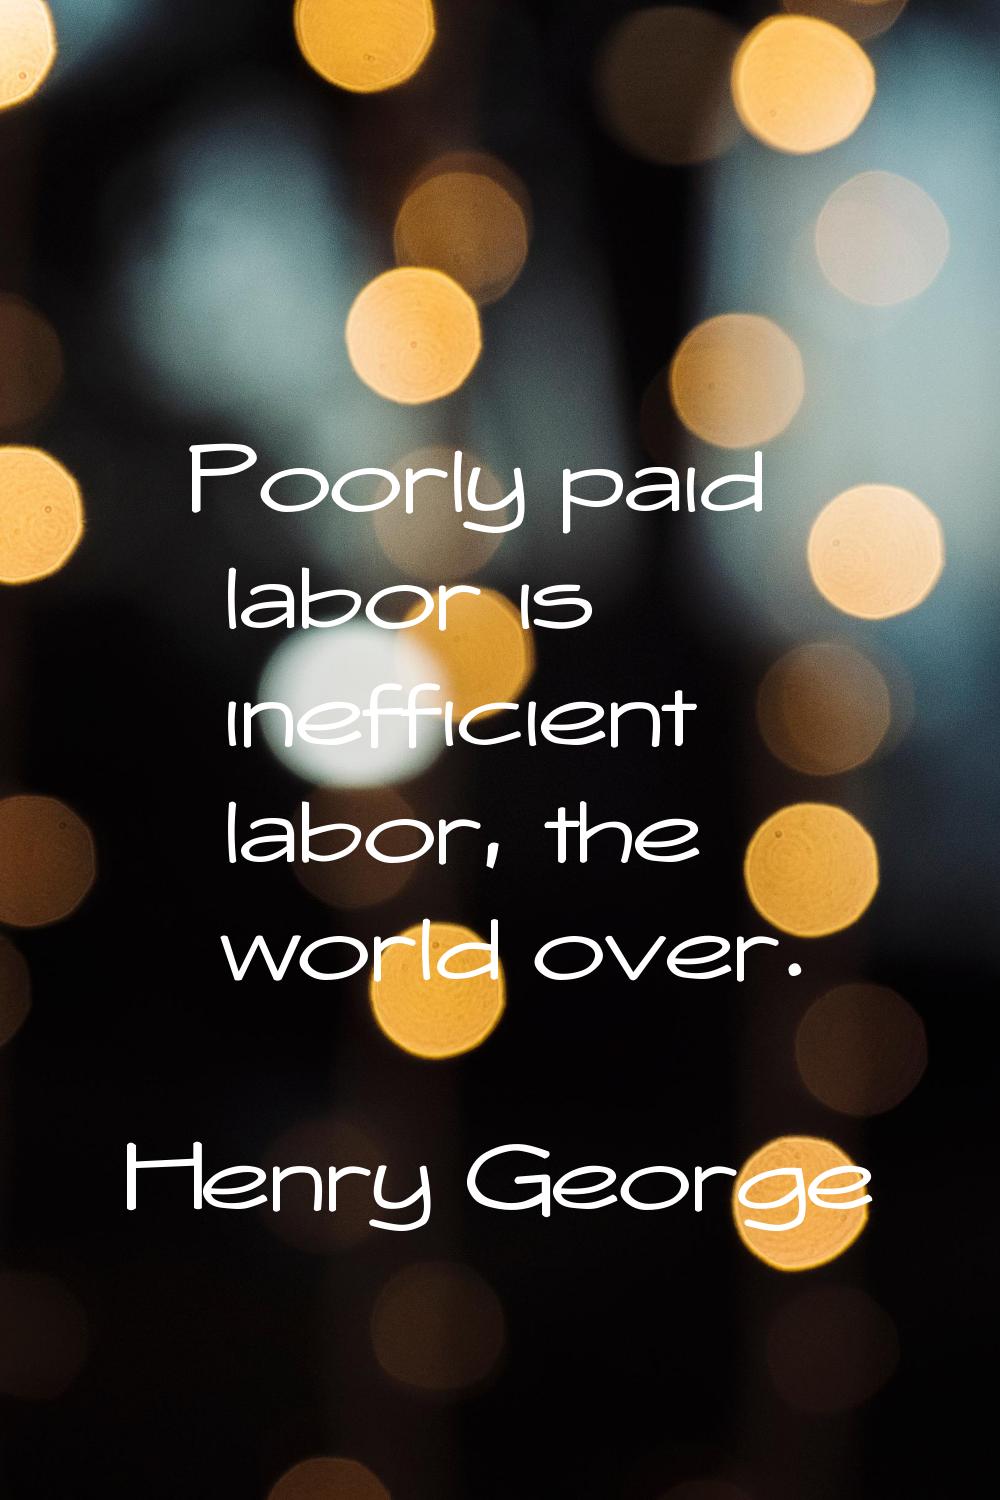 Poorly paid labor is inefficient labor, the world over.